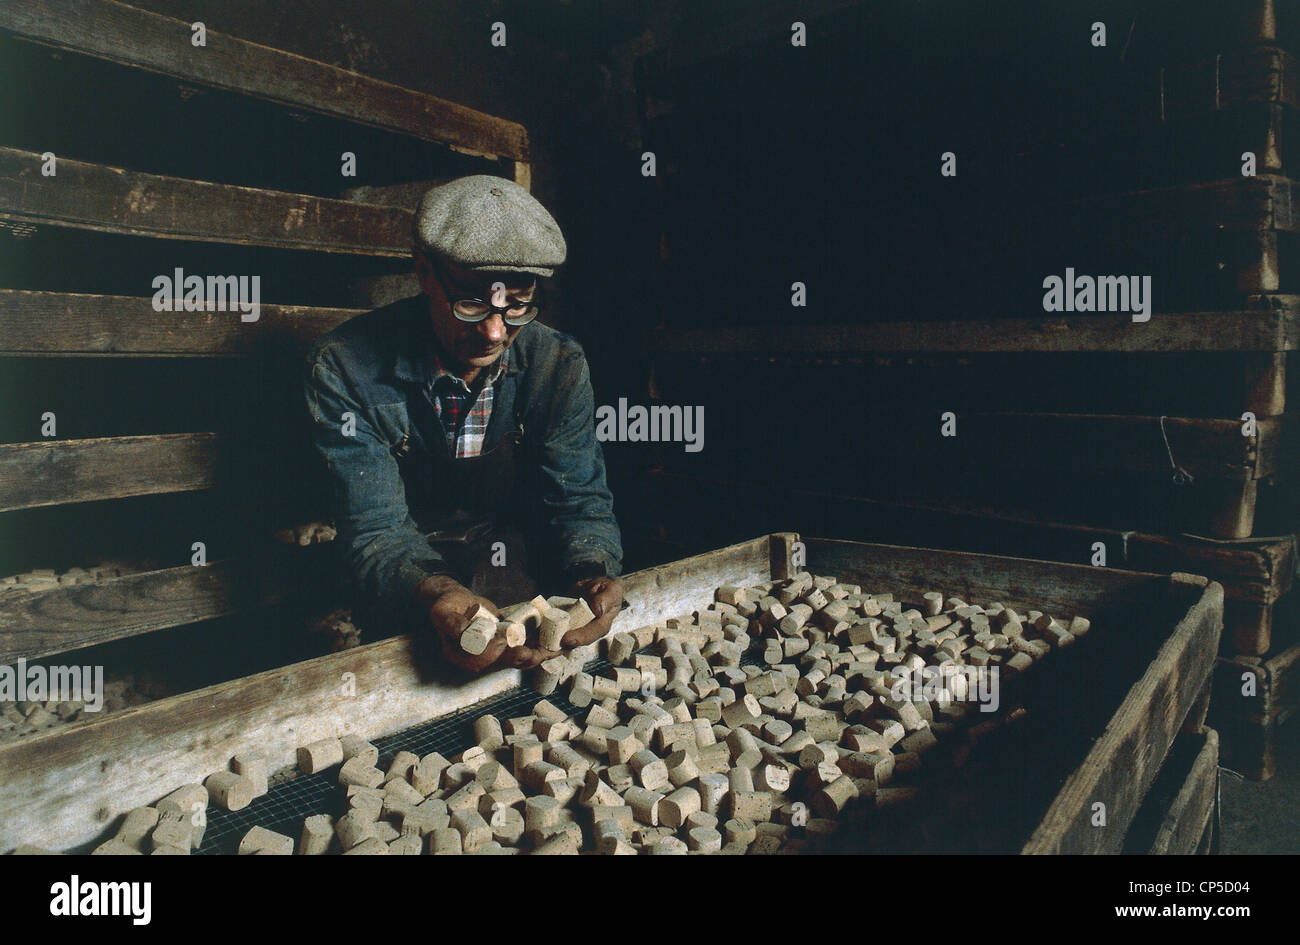 Sardinia - Calangianus (Ss). Cork processing, drying of cork stoppers for bottles. Stock Photo